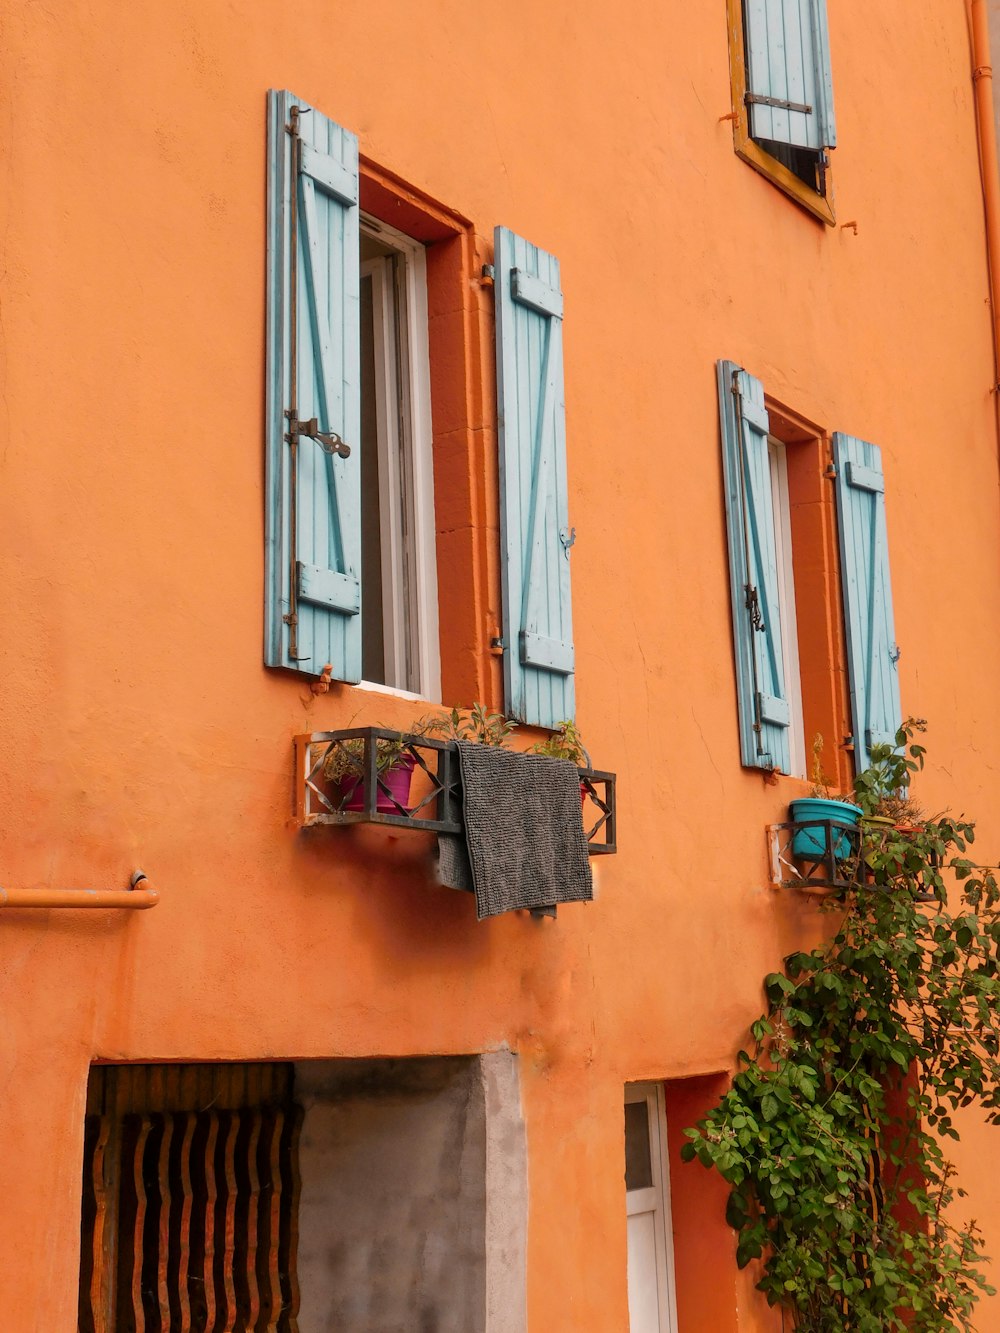 an orange building with blue shutters and a window